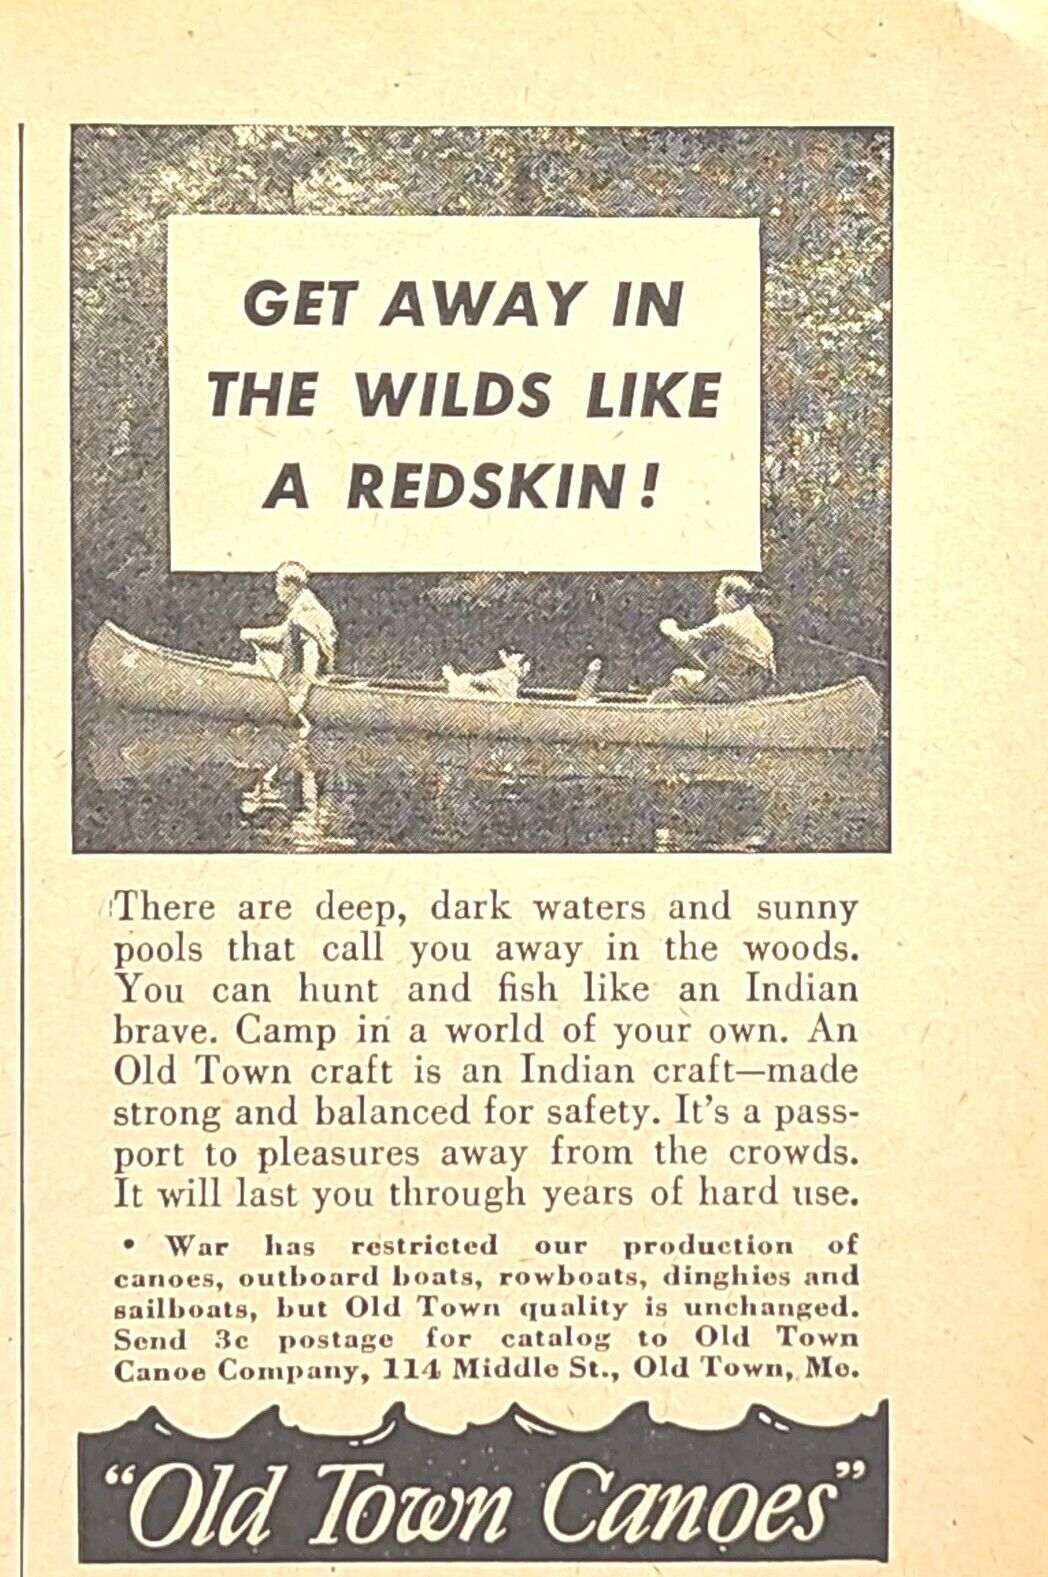 Old Town Canoes Maine War Production Get Away In The Wilds Vintage Print Ad 1945